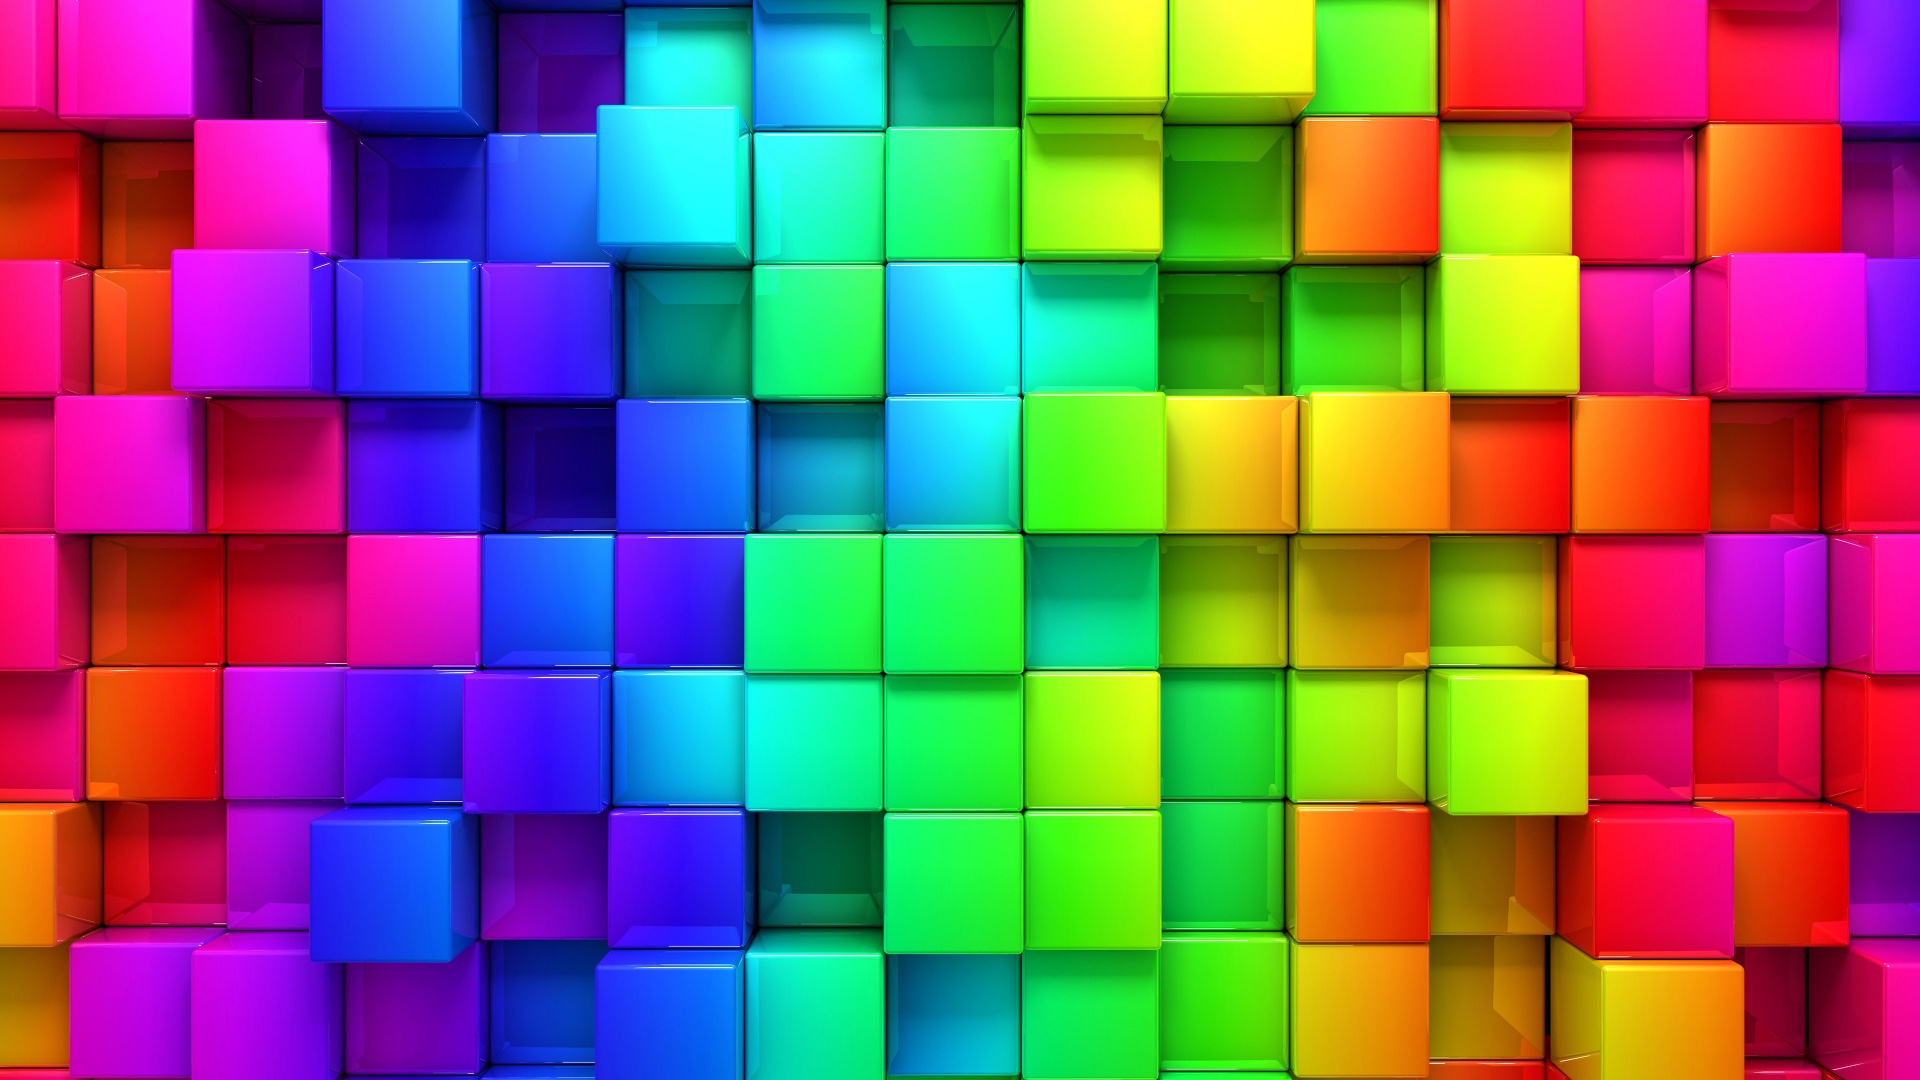 3D Rendering Cubes Colored